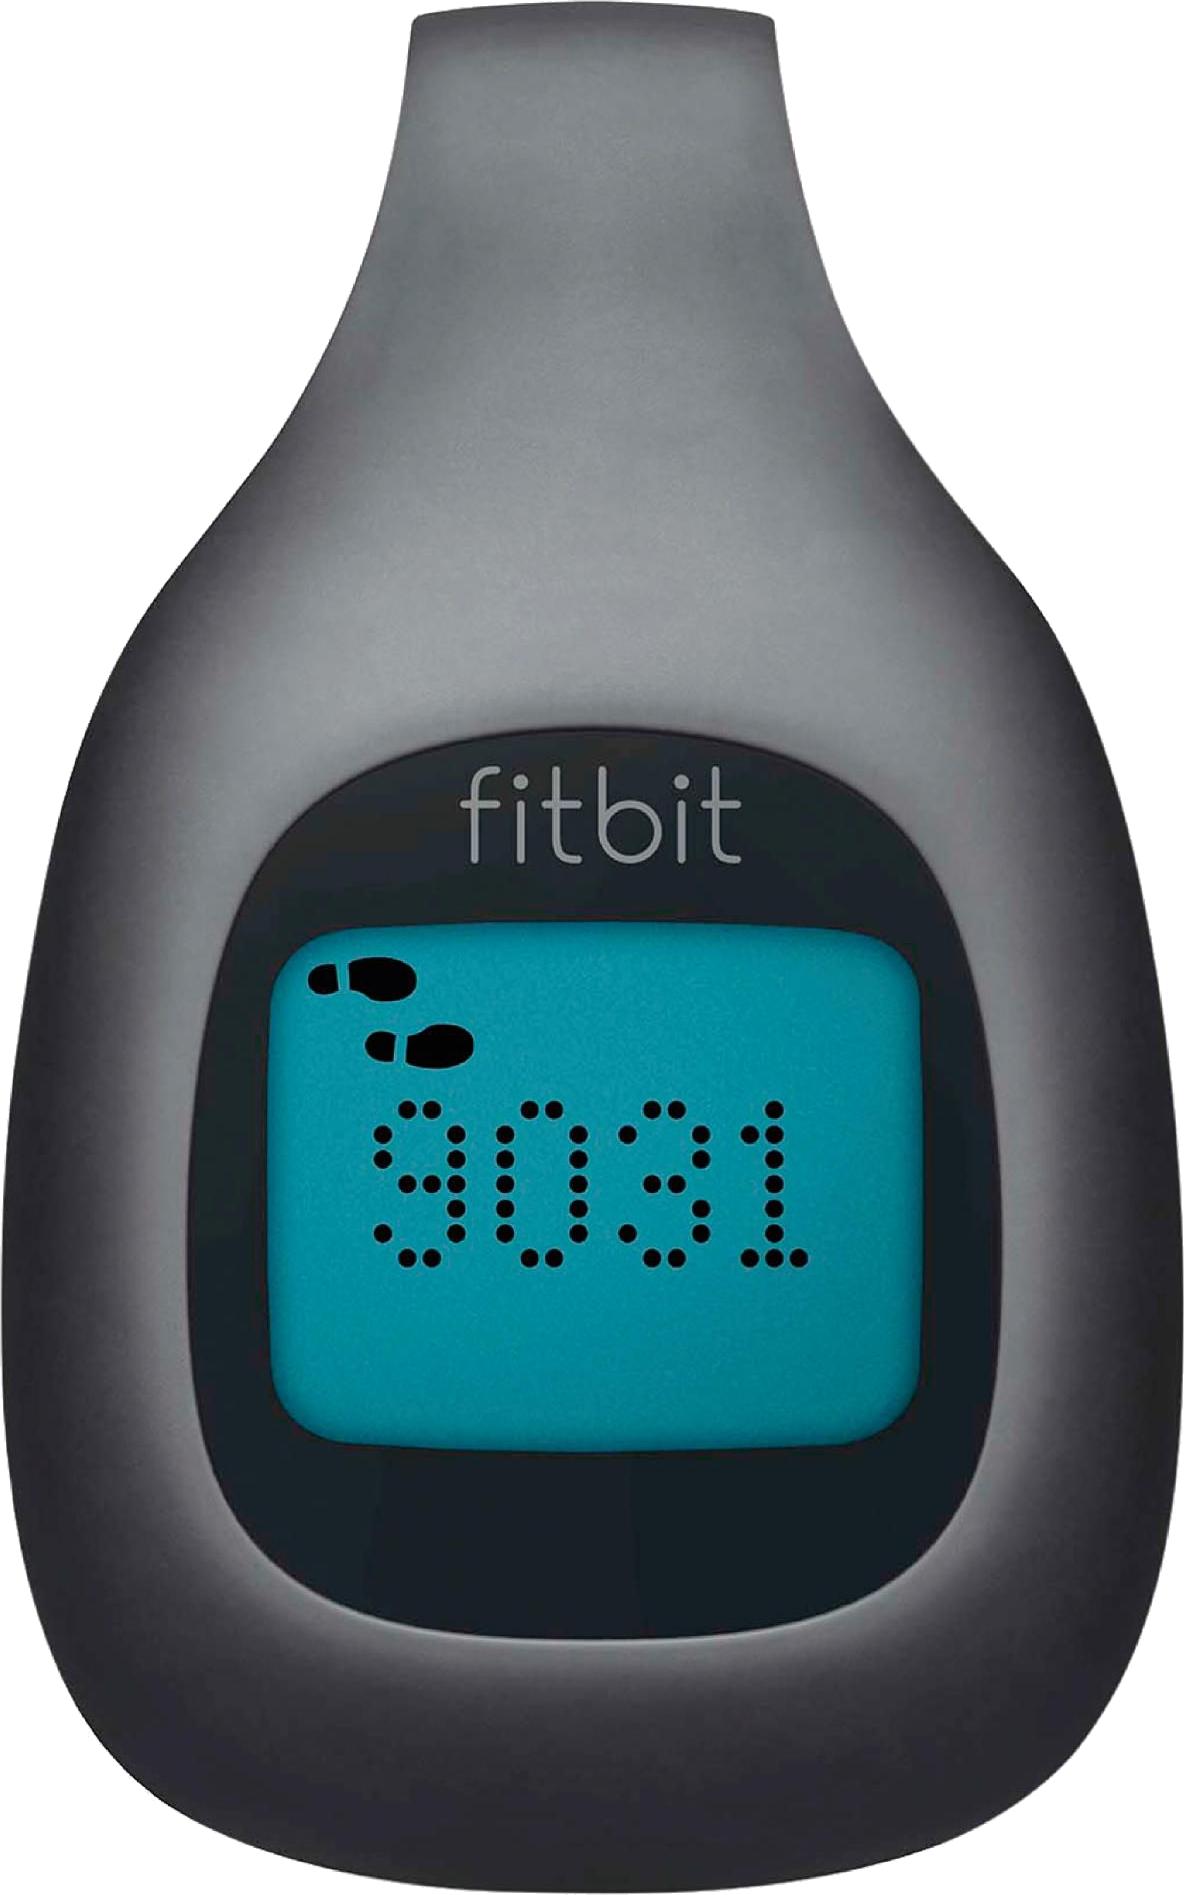 What's the cheapest Fitbit? | iMore